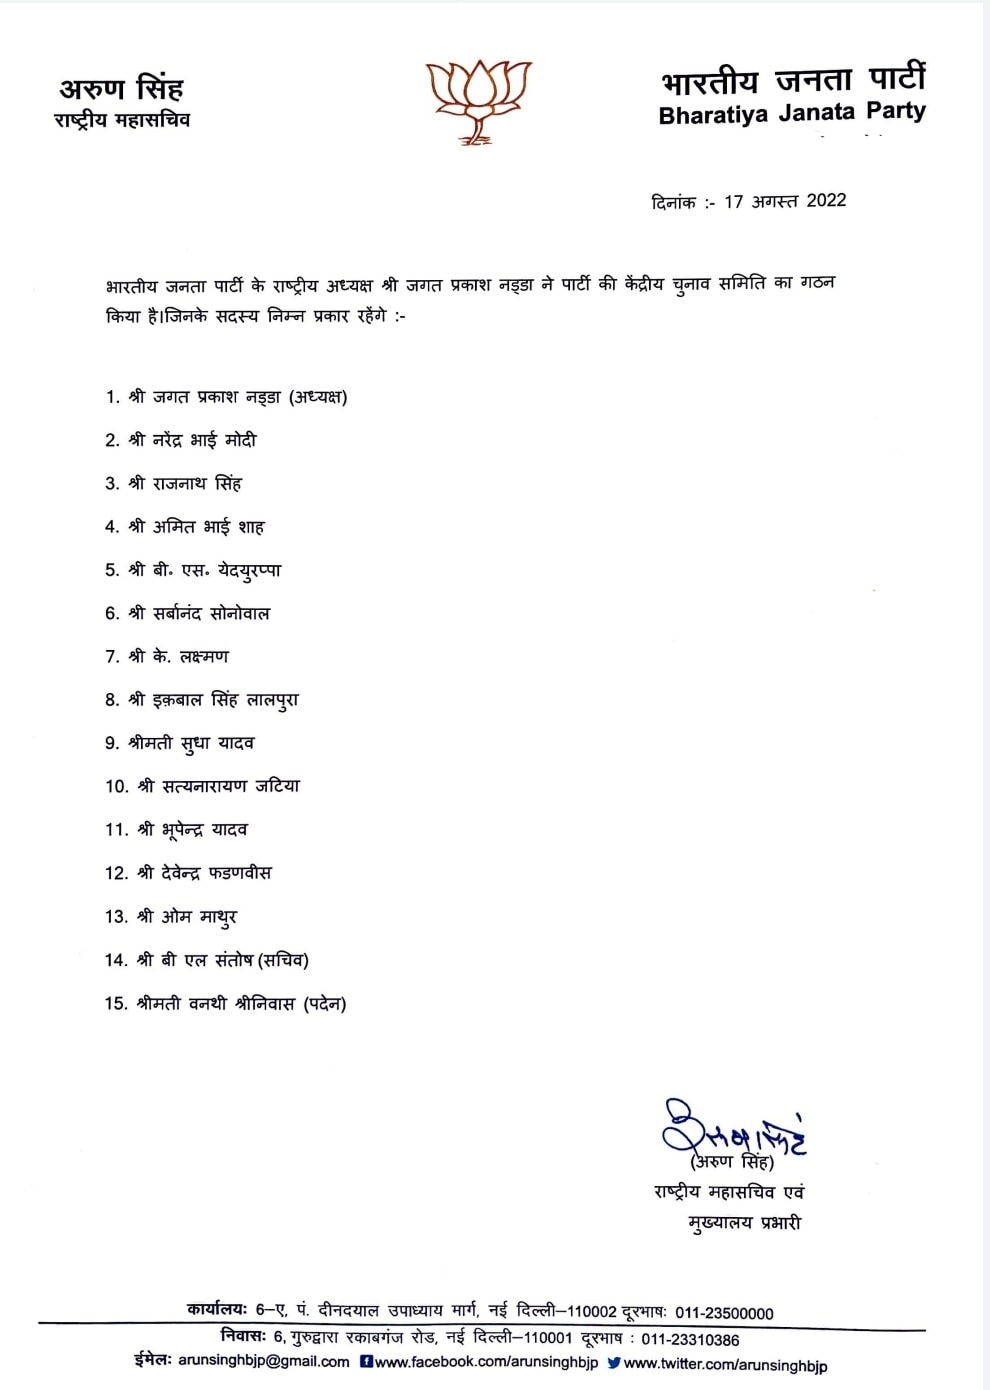 BJP releases a list of members of the party's Central Election Committee (CEC).